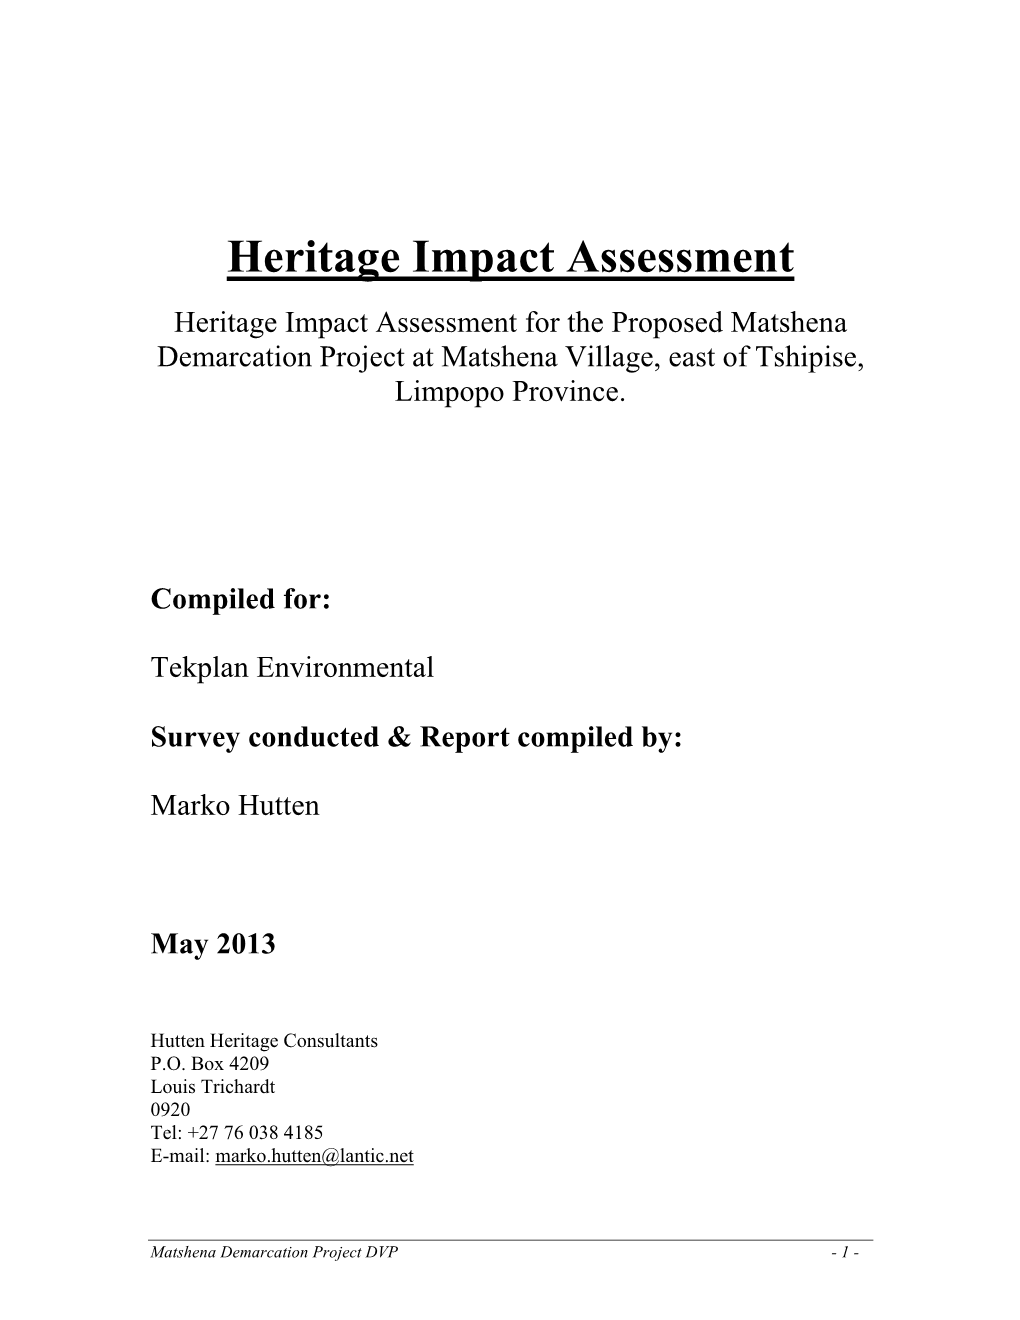 Heritage Impact Assessment for the Proposed Matshena Demarcation Project at Matshena Village, East of Tshipise, Limpopo Province